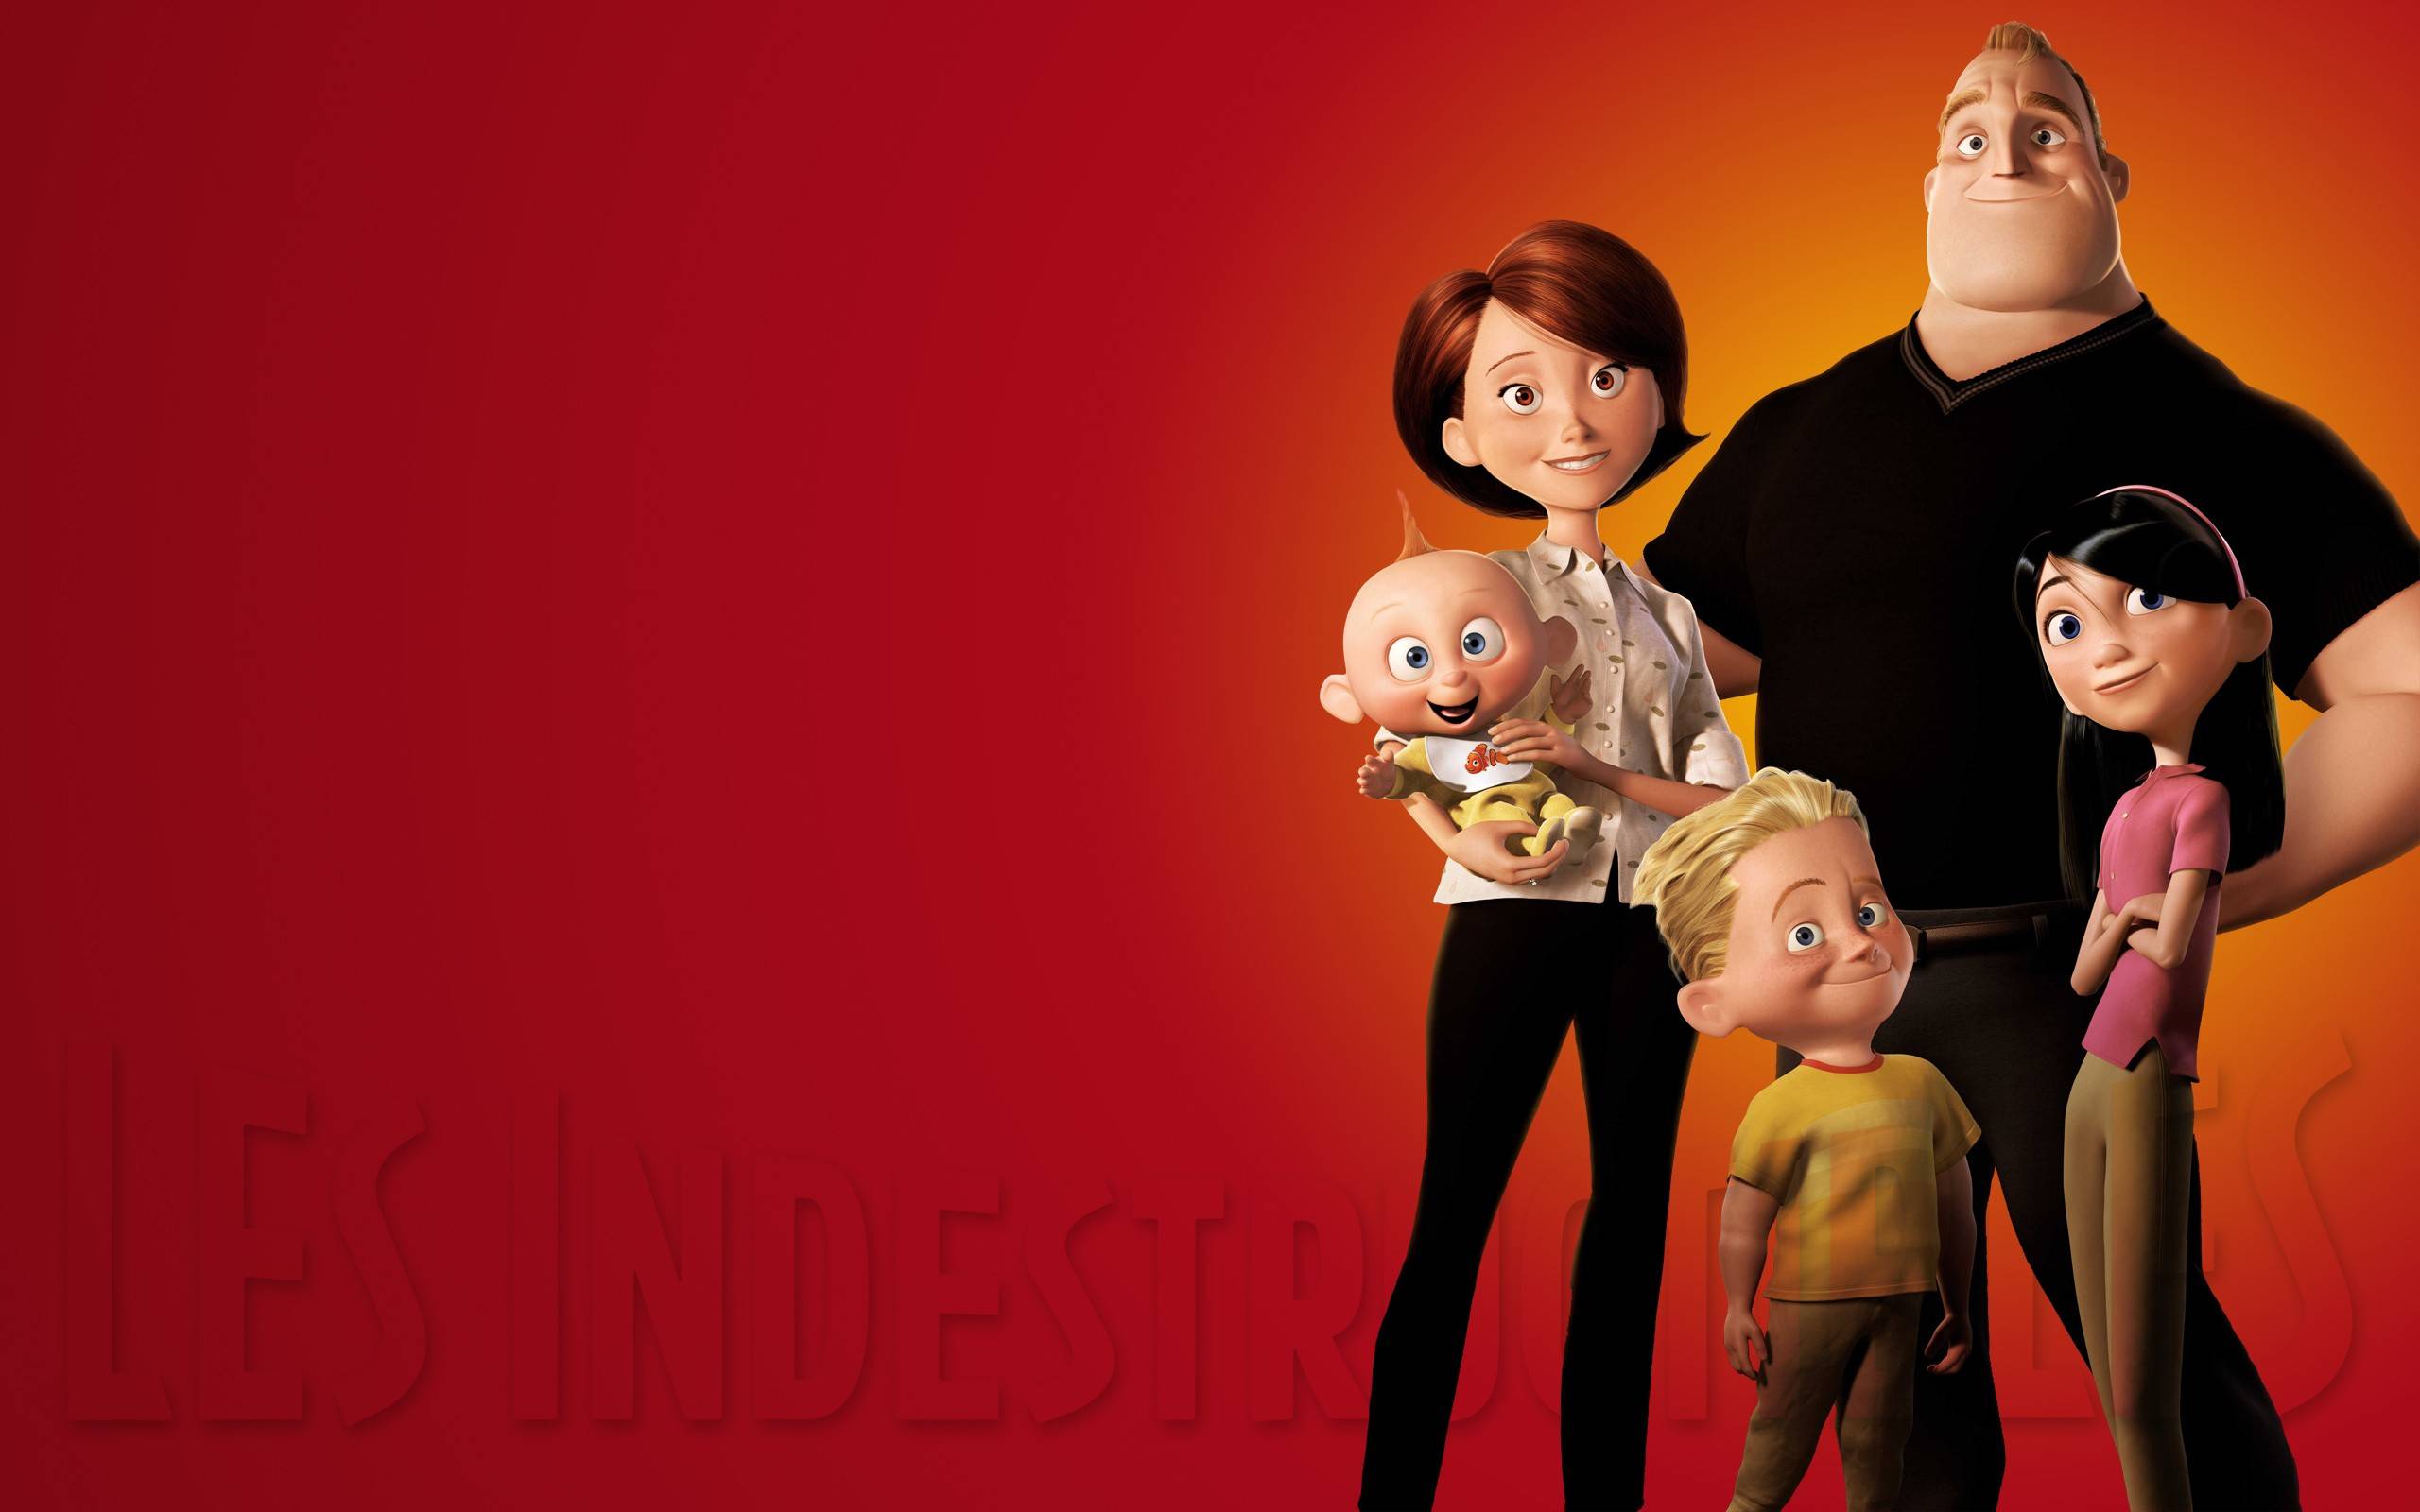 The Incredibles Cartoon Image Wallpaper for iPod